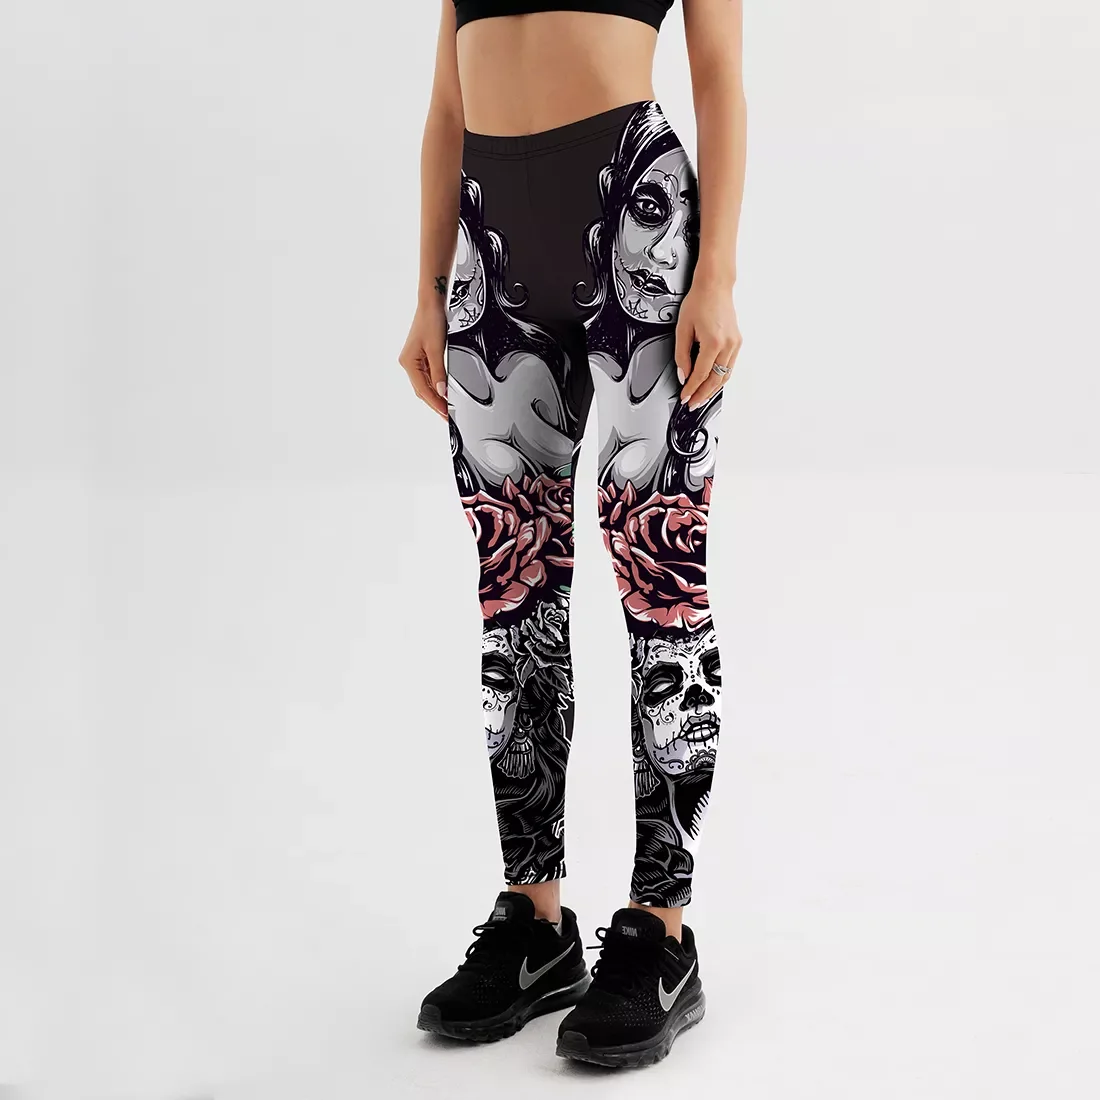 NEW 2023 New Arrival Women Leggings Sexy Girl With Roses Printed Leggings Gothic Fitness Workout Leggings Mid Waist Pants S-4XL